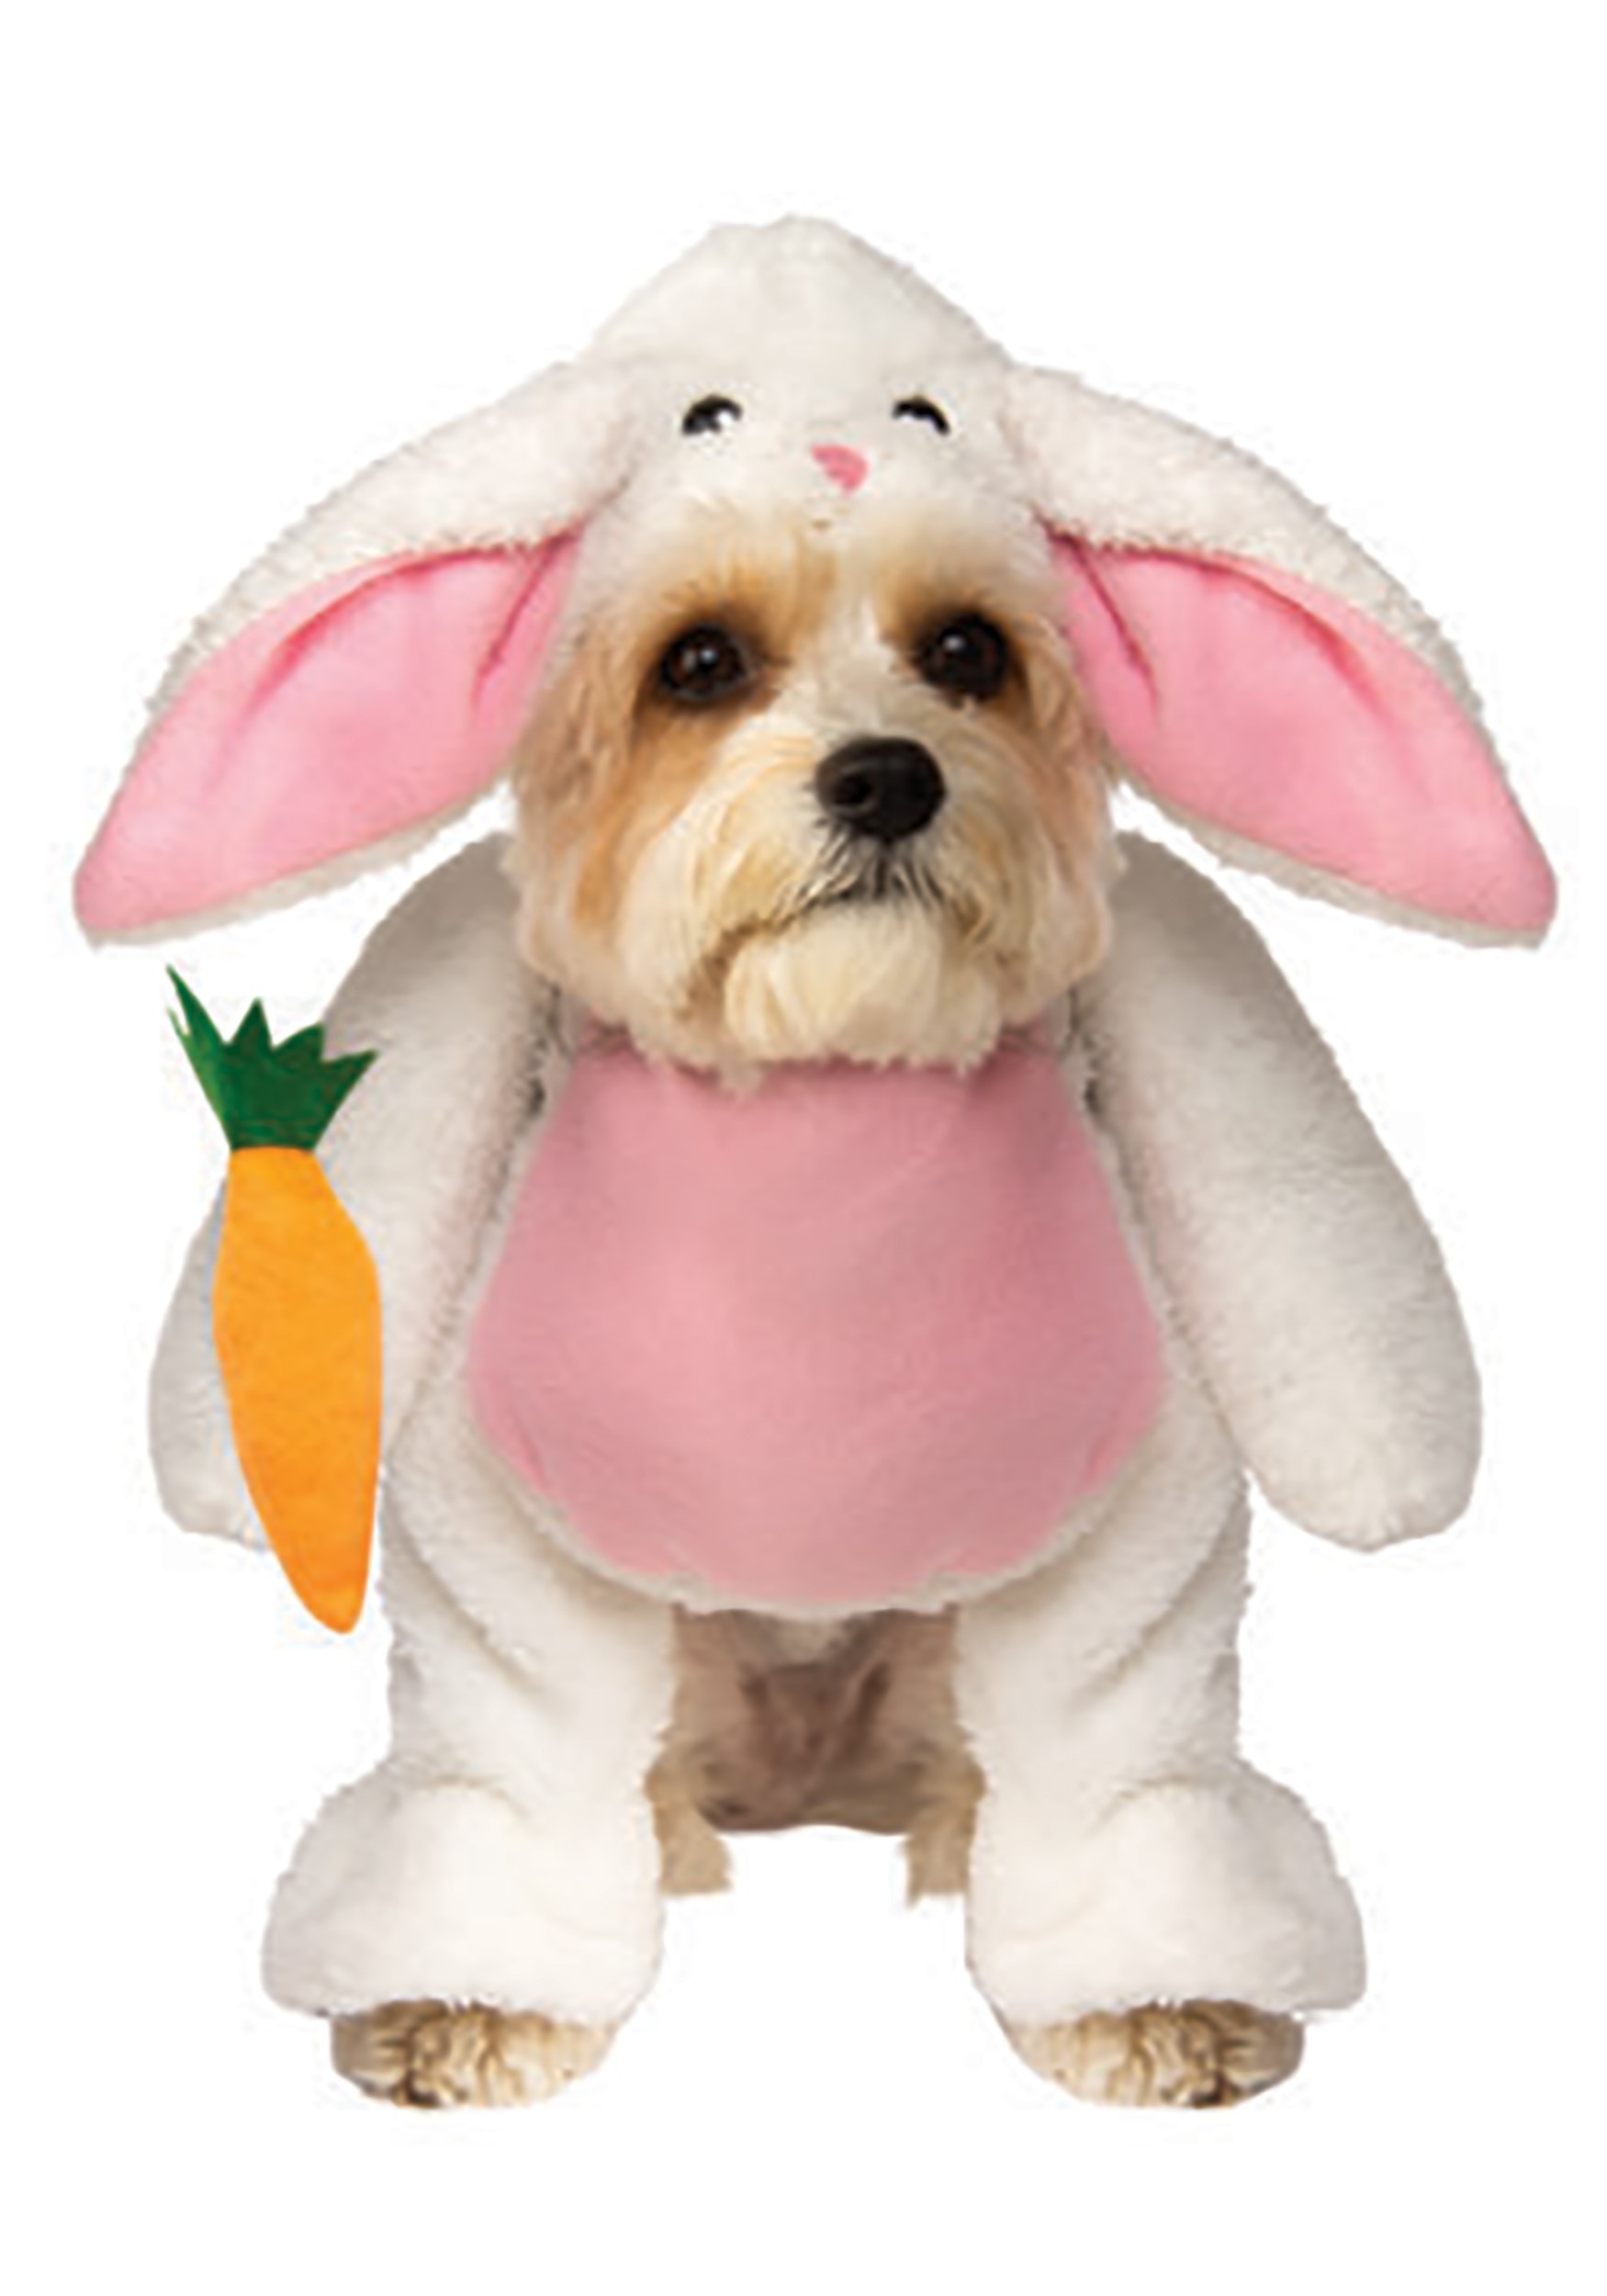 BUNNY COSTUMES Dress Your Dogs Like a Pink Rabbit High Quality Dog Costume 